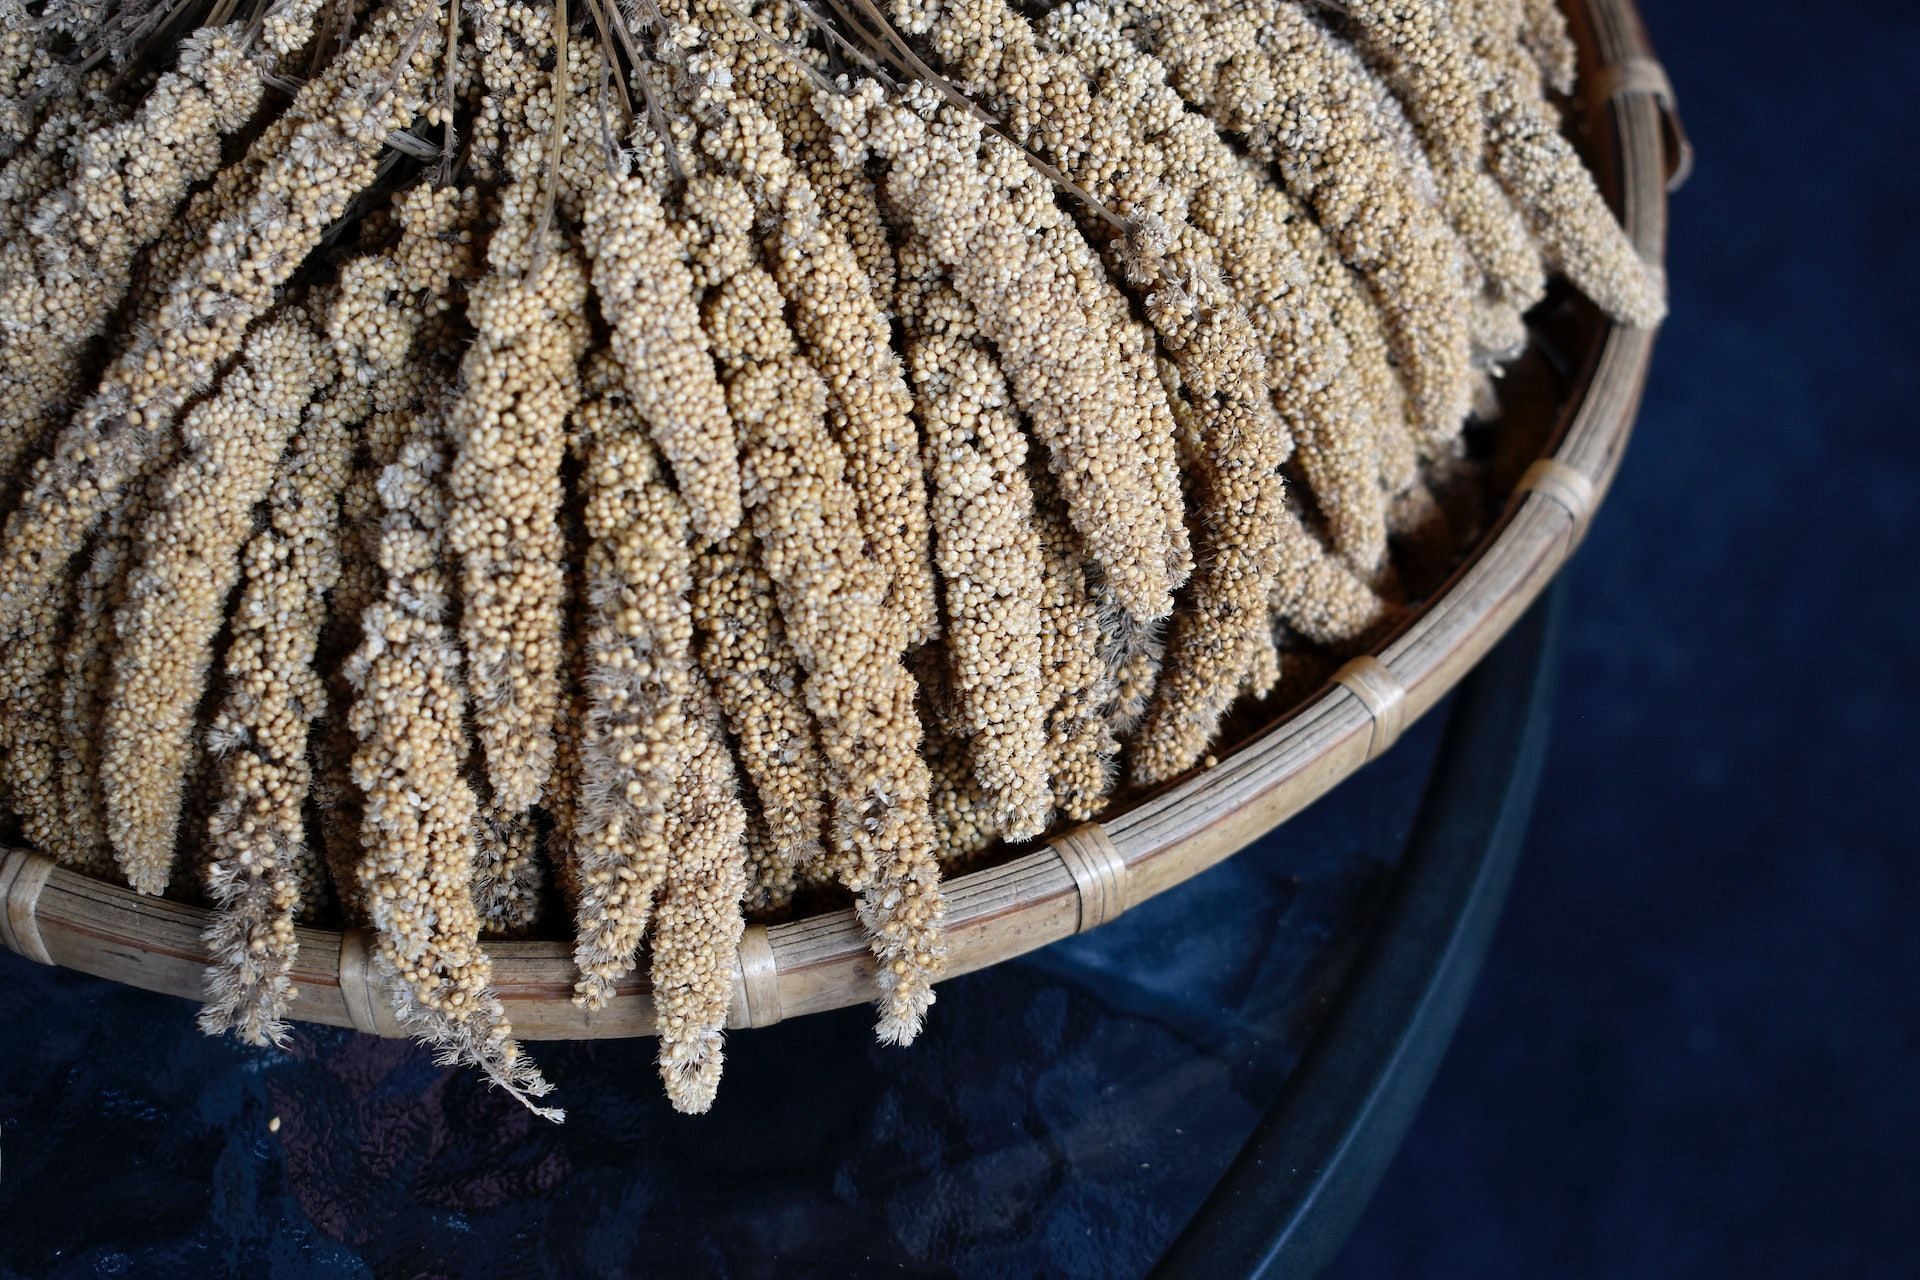 Millets can be divided into two categories. (Photo via Pexels/nnitatong)